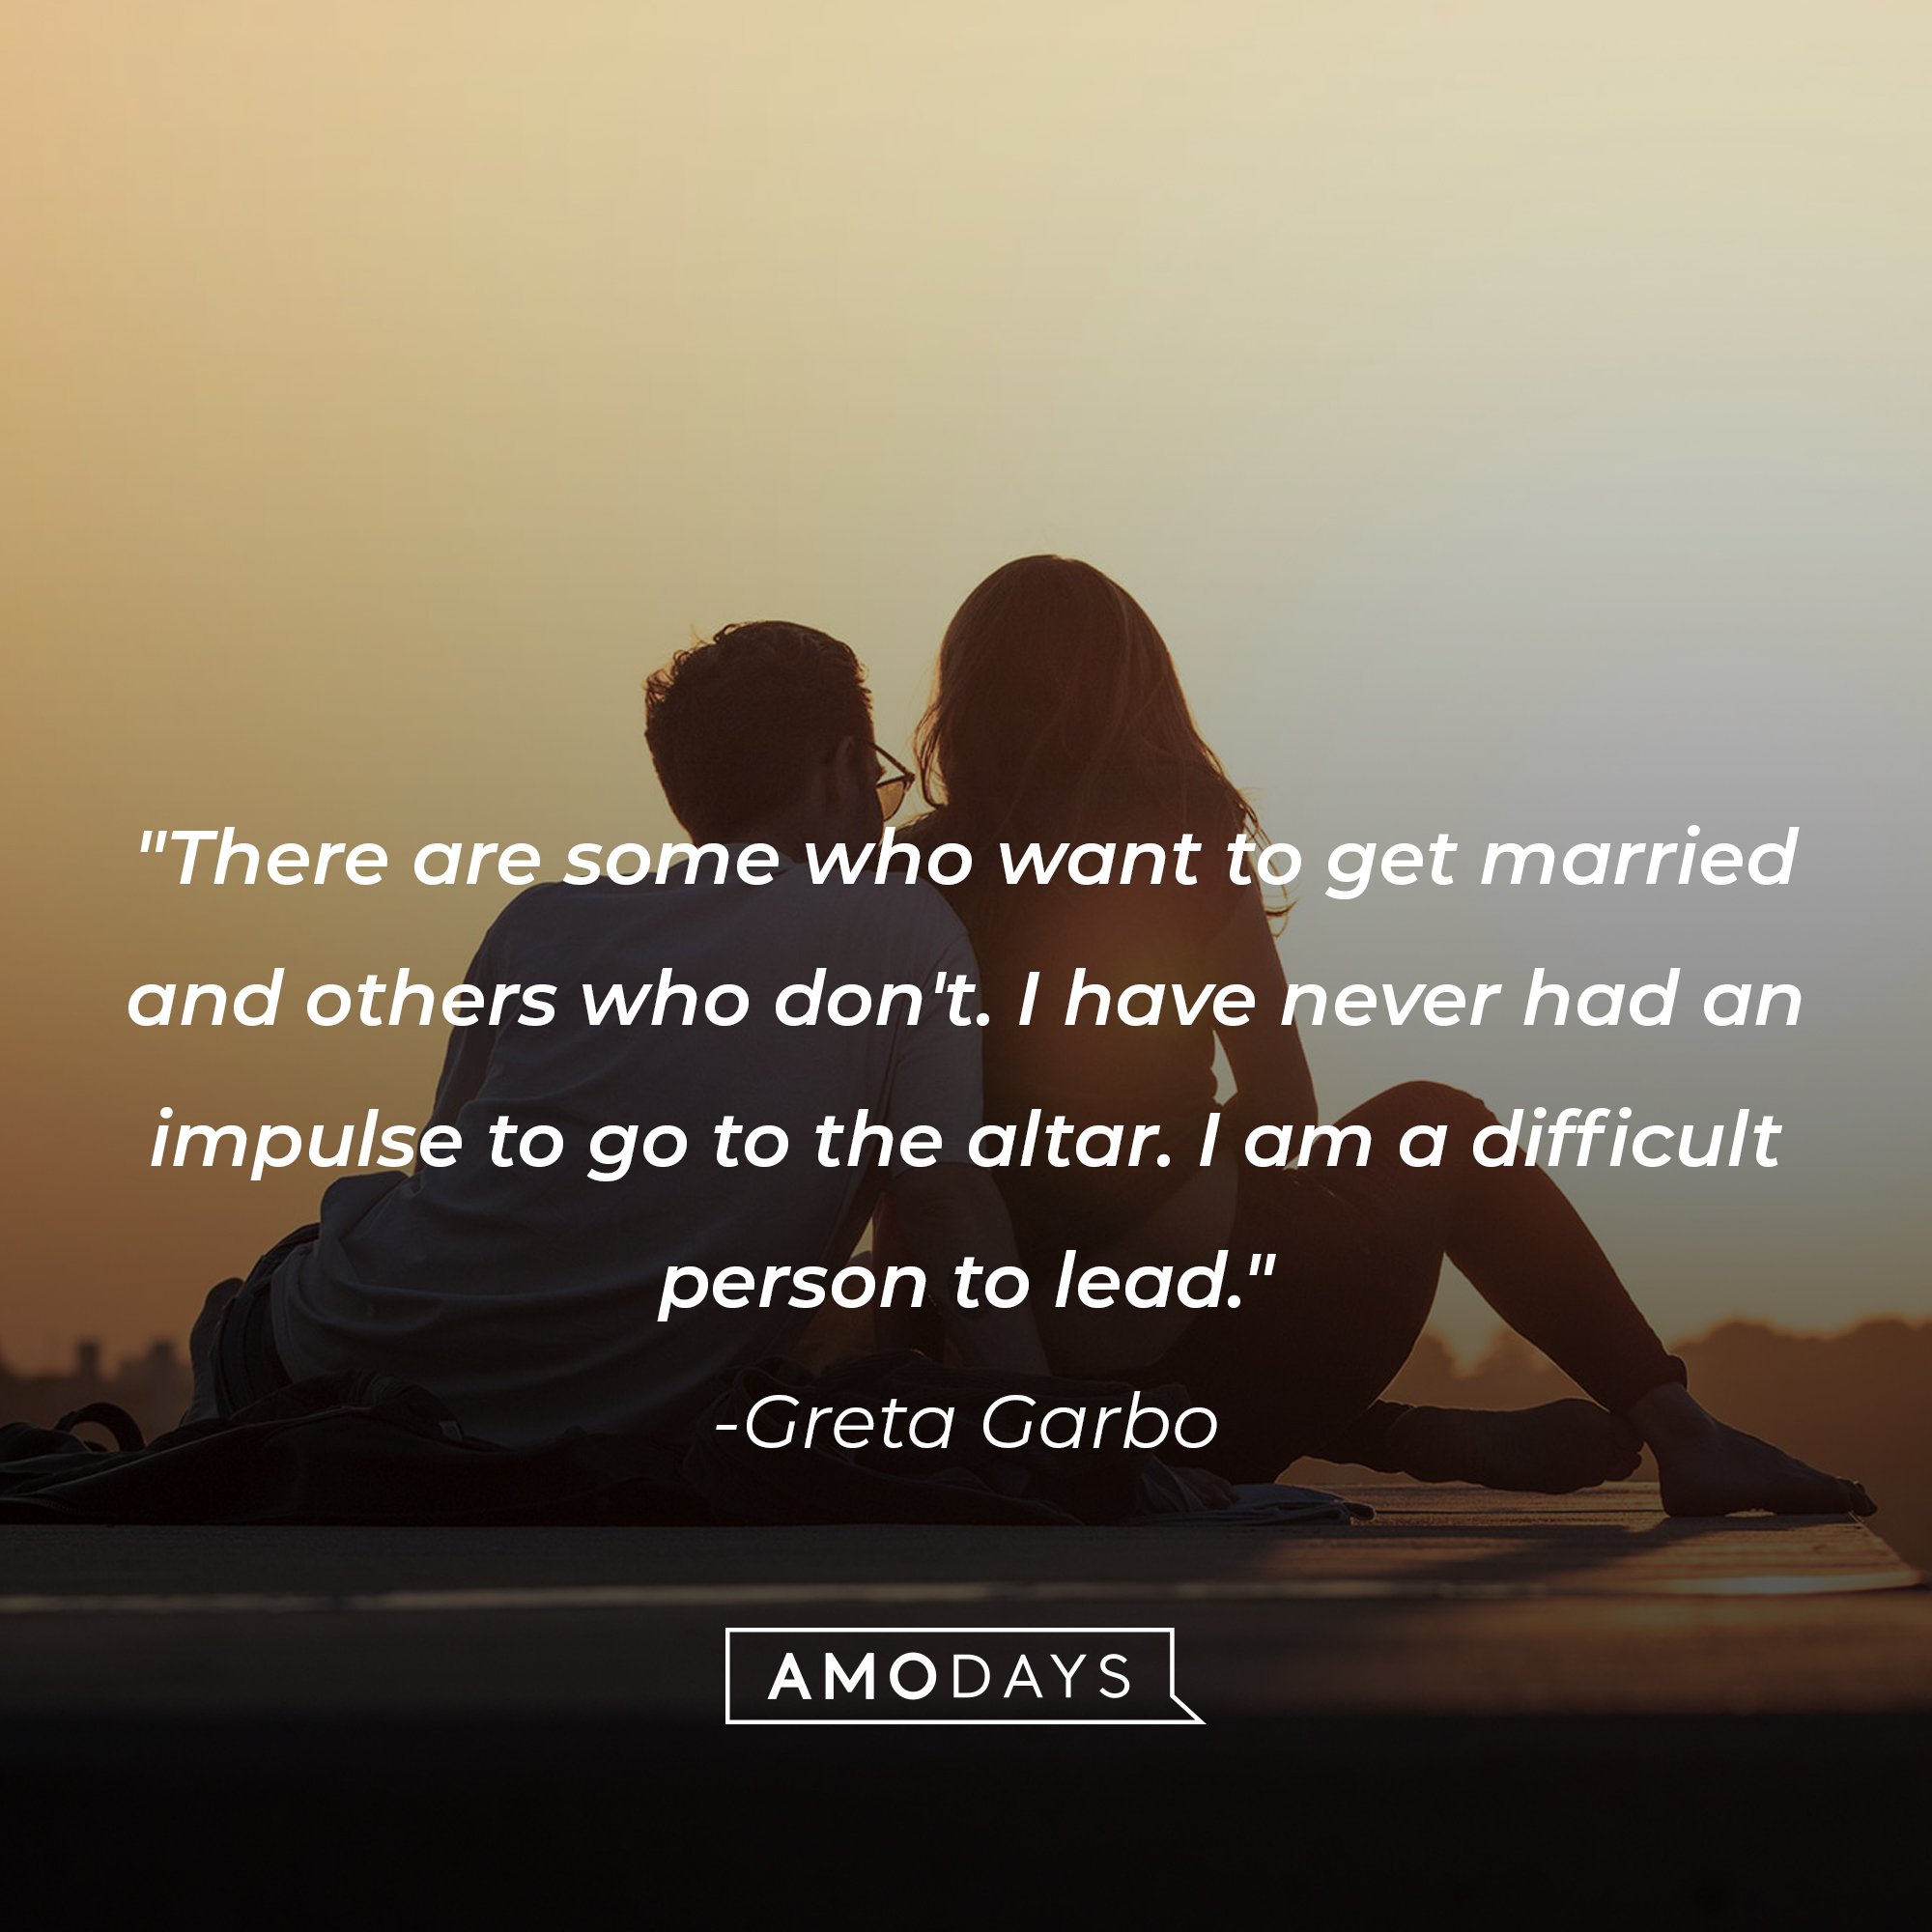  Greta Garbo’s quote: "There are some who want to get married and others who don't. I have never had an impulse to go to the altar. I am a difficult person to lead." | Image: AmoDays 